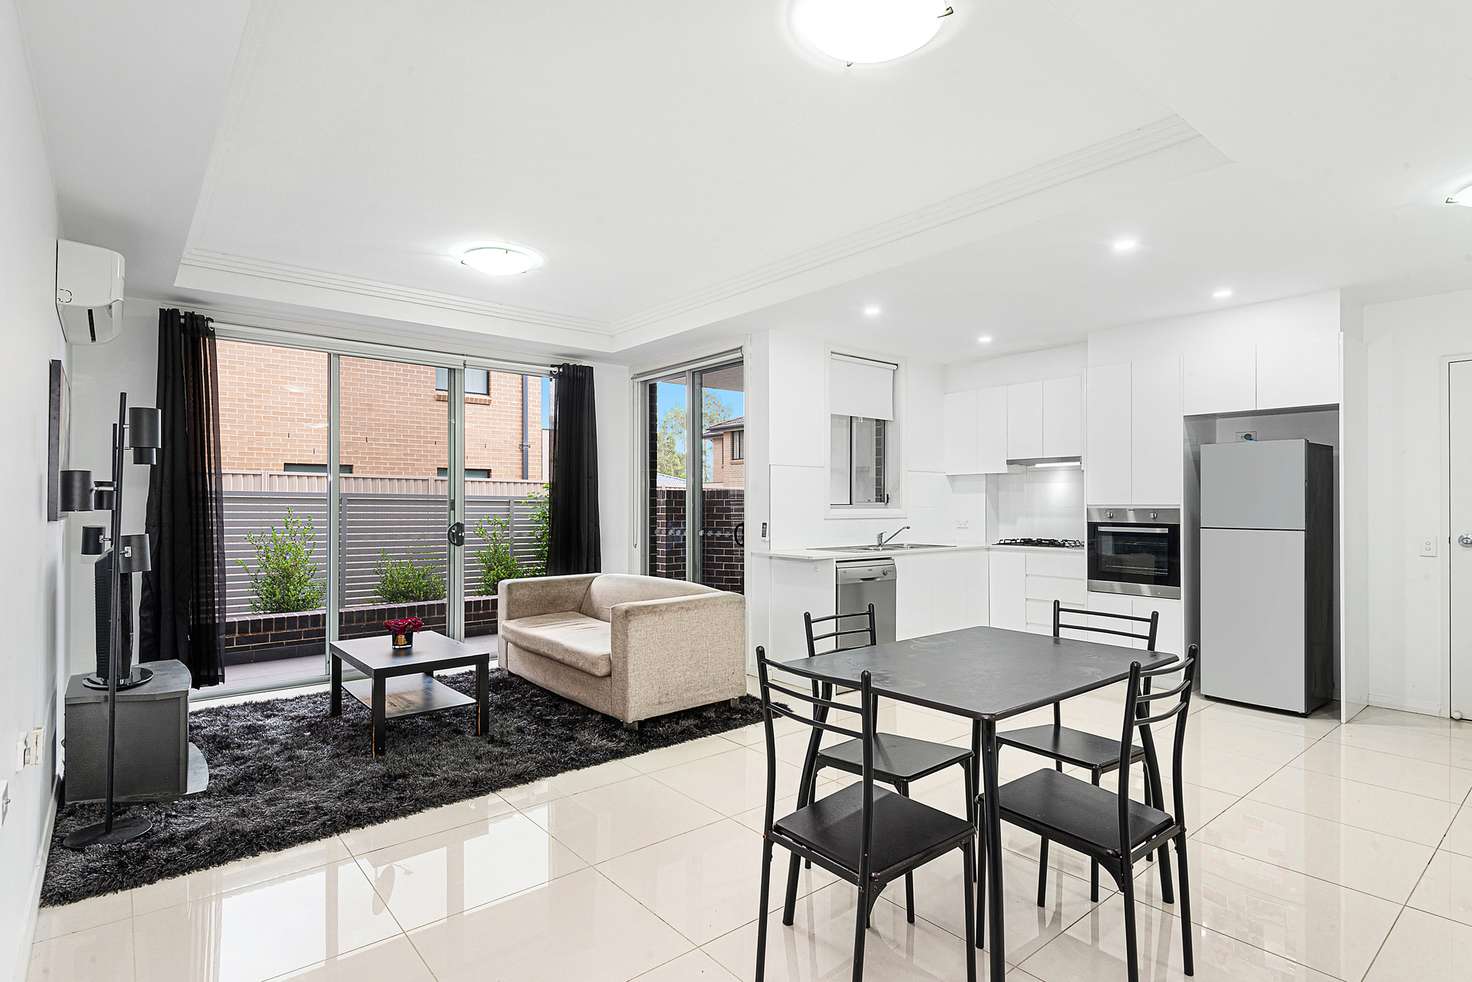 Main view of Homely apartment listing, 13/14-16 Smythe Street, Merrylands NSW 2160